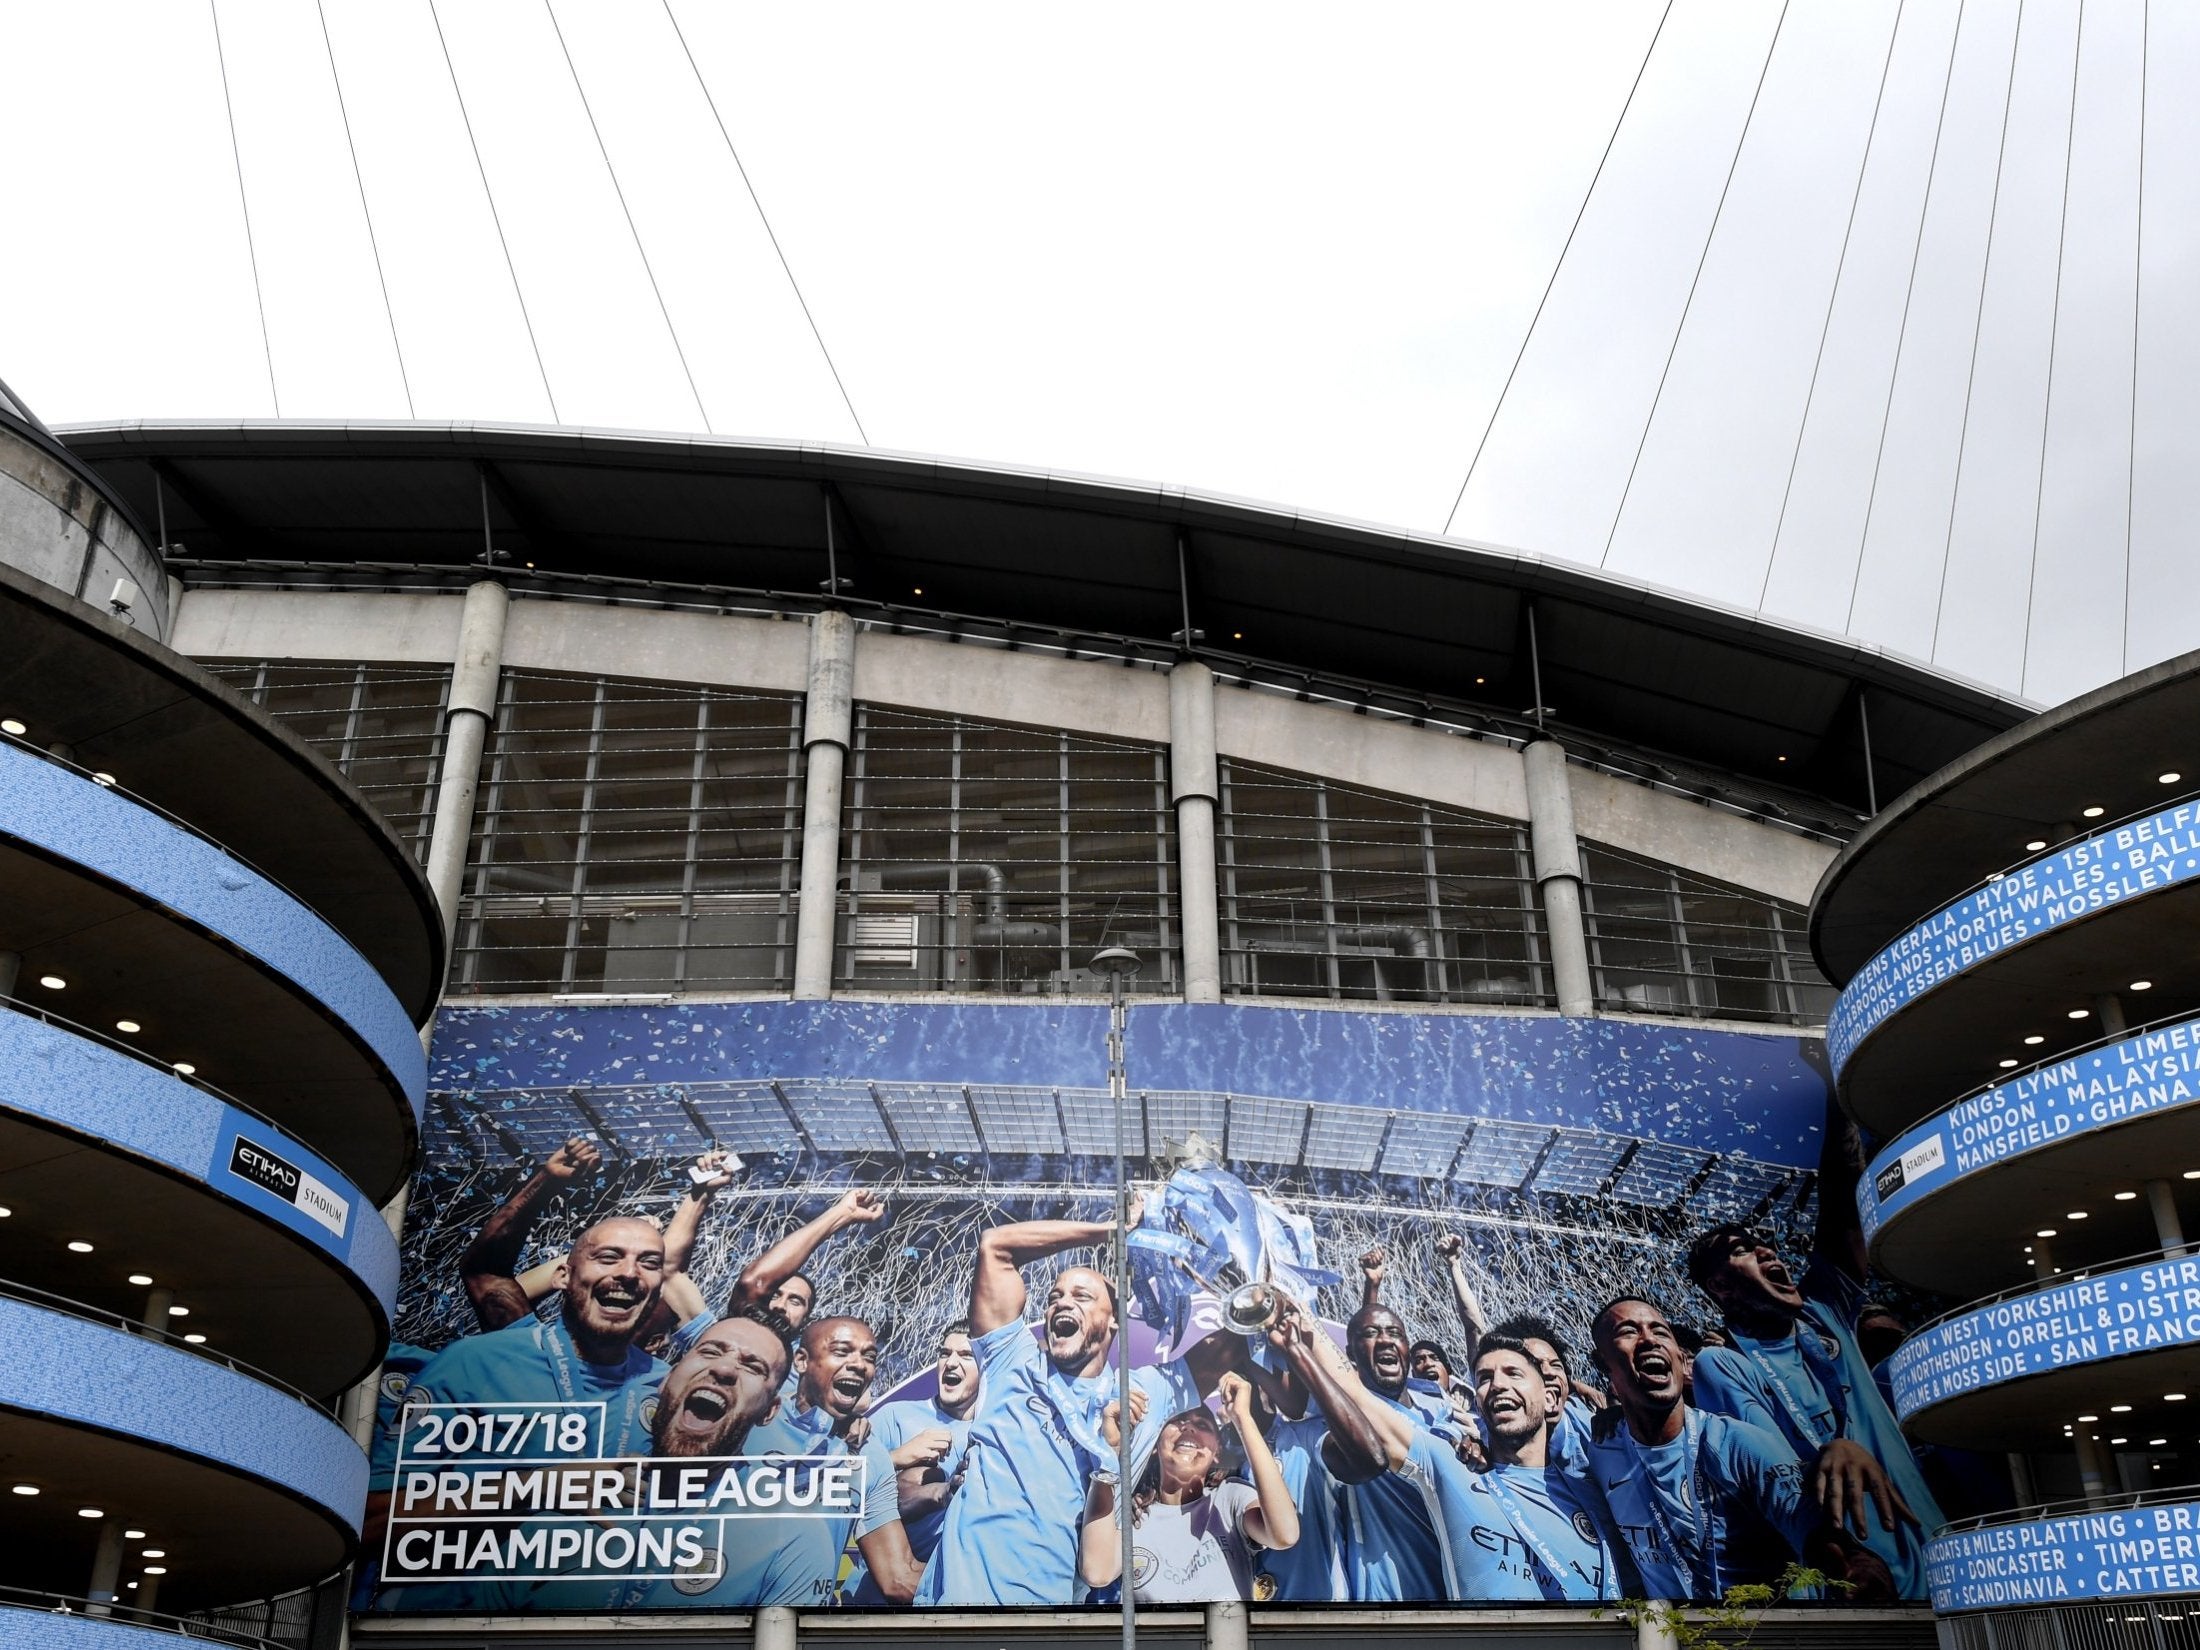 Manchester City vs Newcastle United - LIVE: Kick-off time, TV channel info, how to watch online, prediction, head-to-head, team news, line-ups, odds